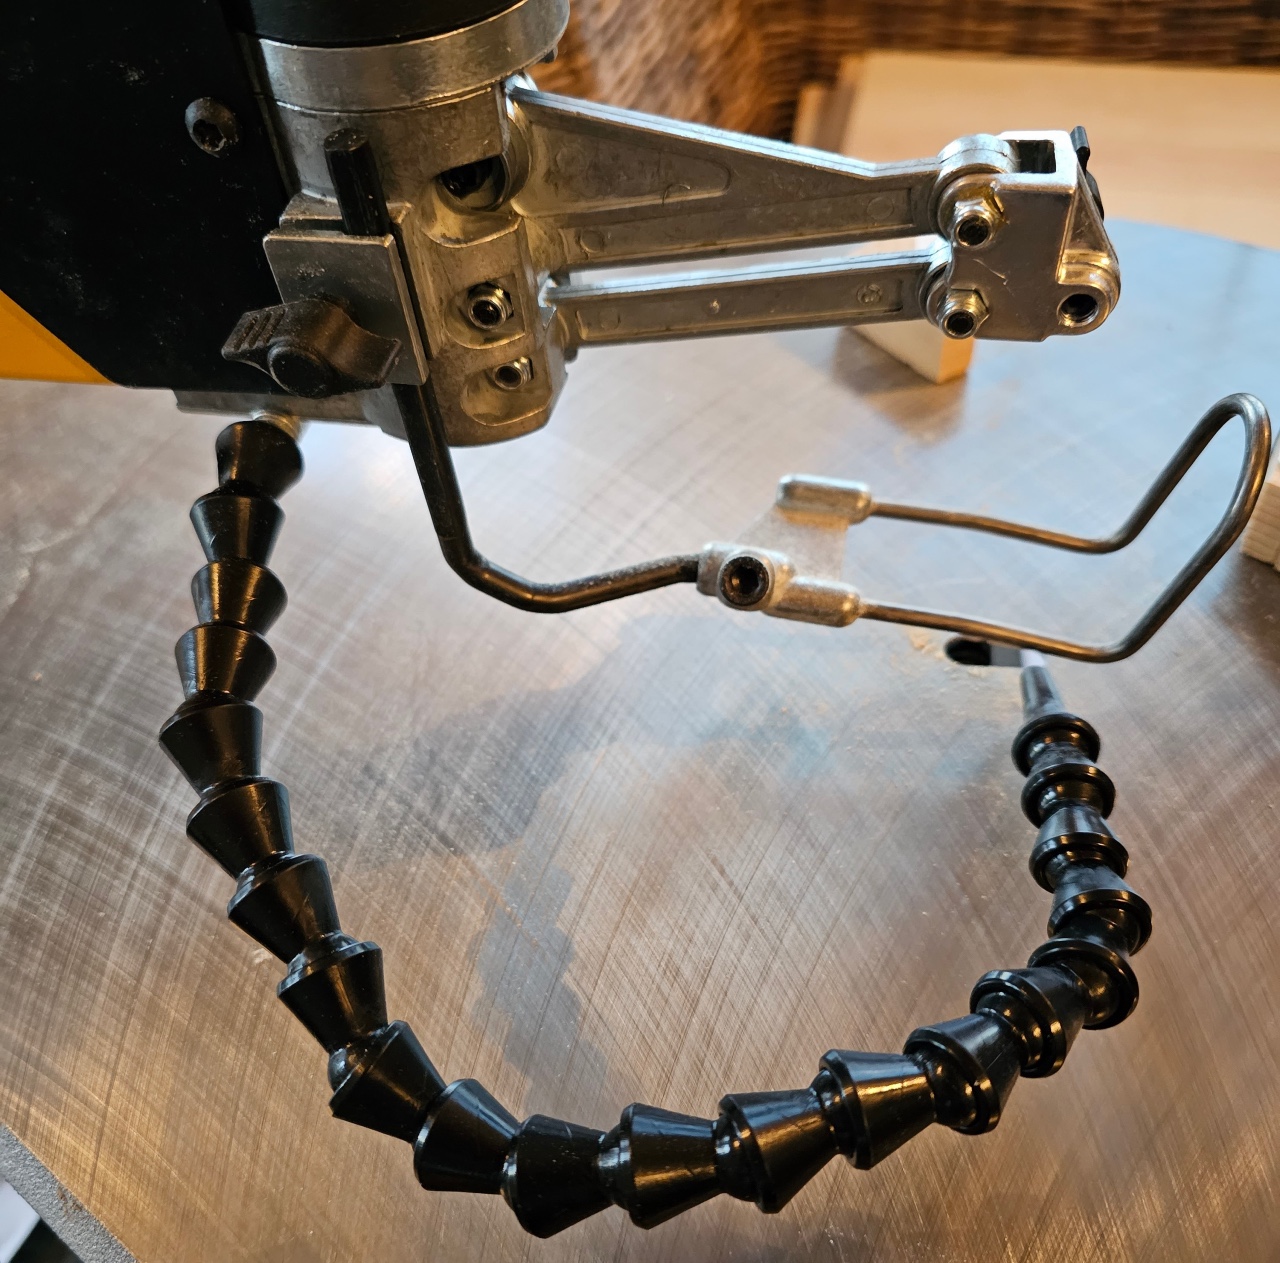 The blade arm and flexible blower on the DeWalt scroll saw.